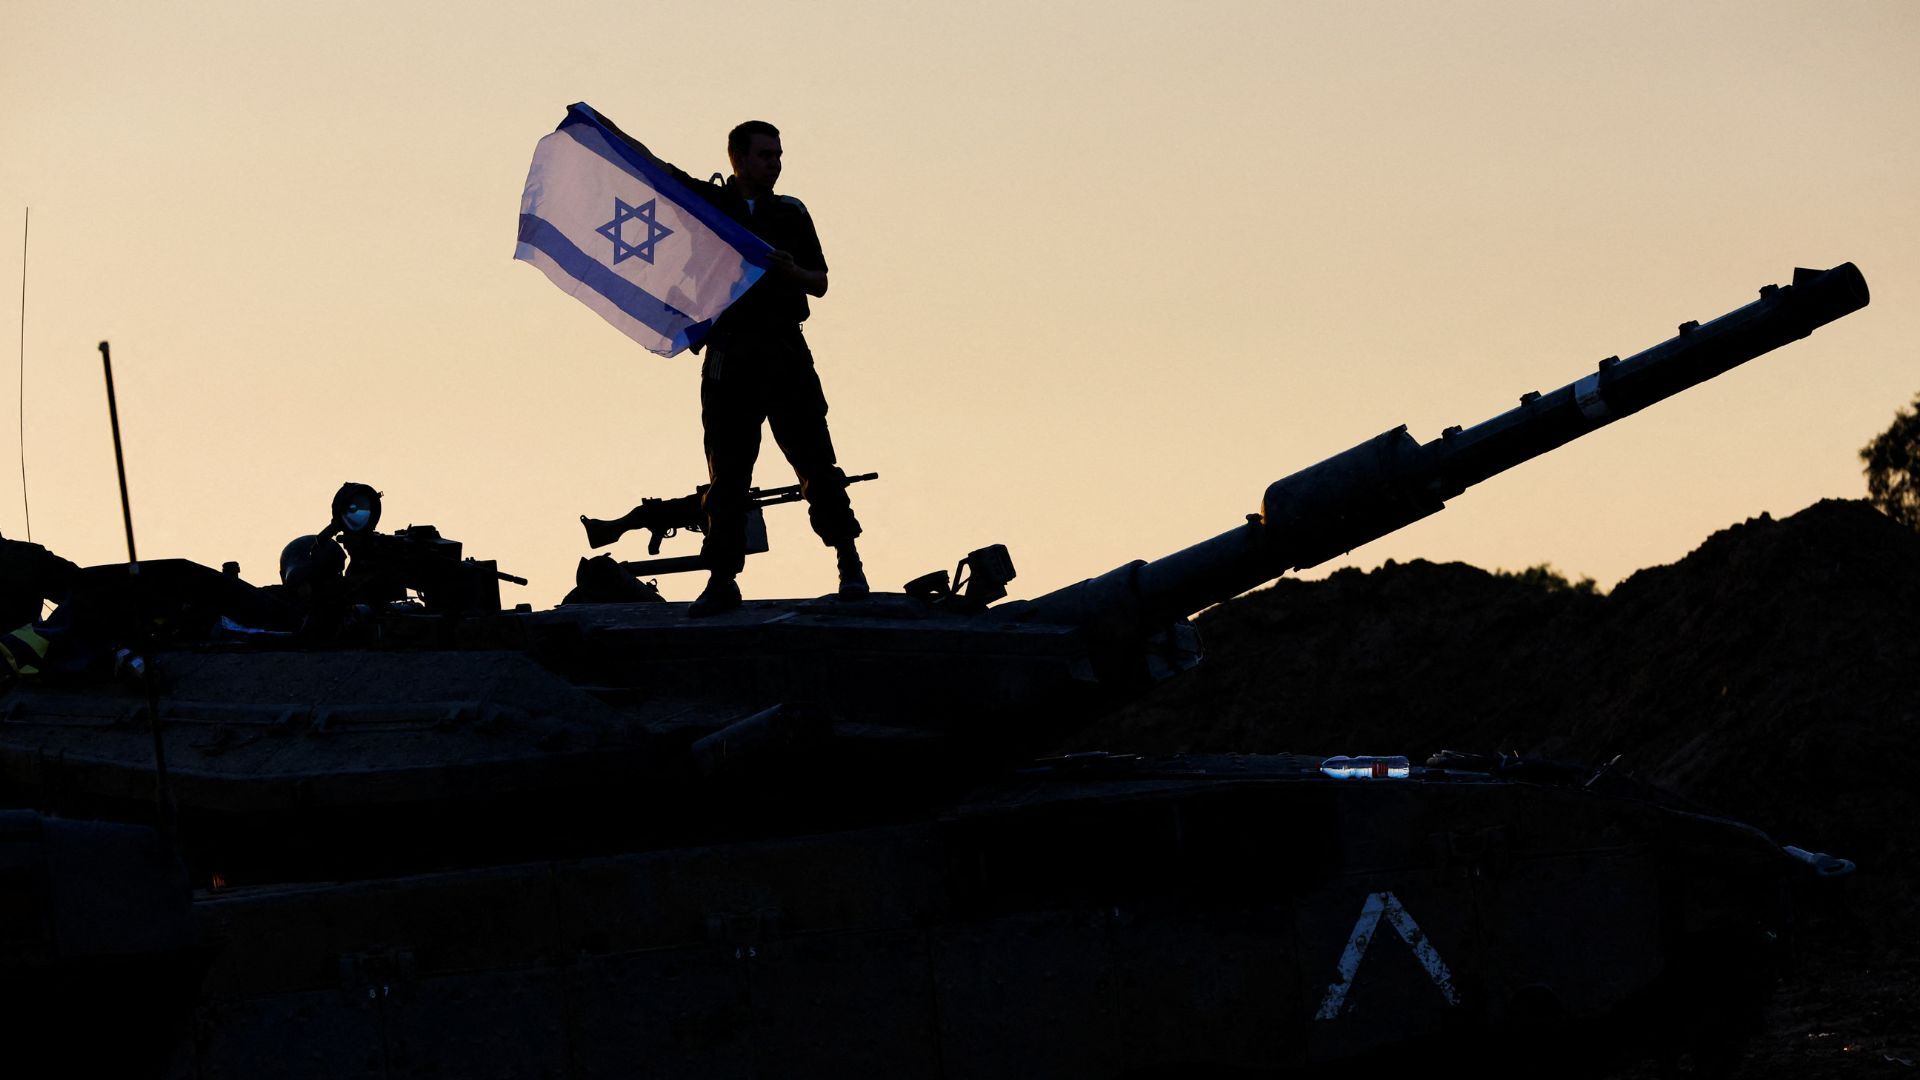 Will Israel heed US calls to protect civilians or risk ‘strategic failure’? | Israel-Palestine conflict #Israel #heed #calls #protect #civilians #risk #strategic #failure #IsraelPalestine #conflict